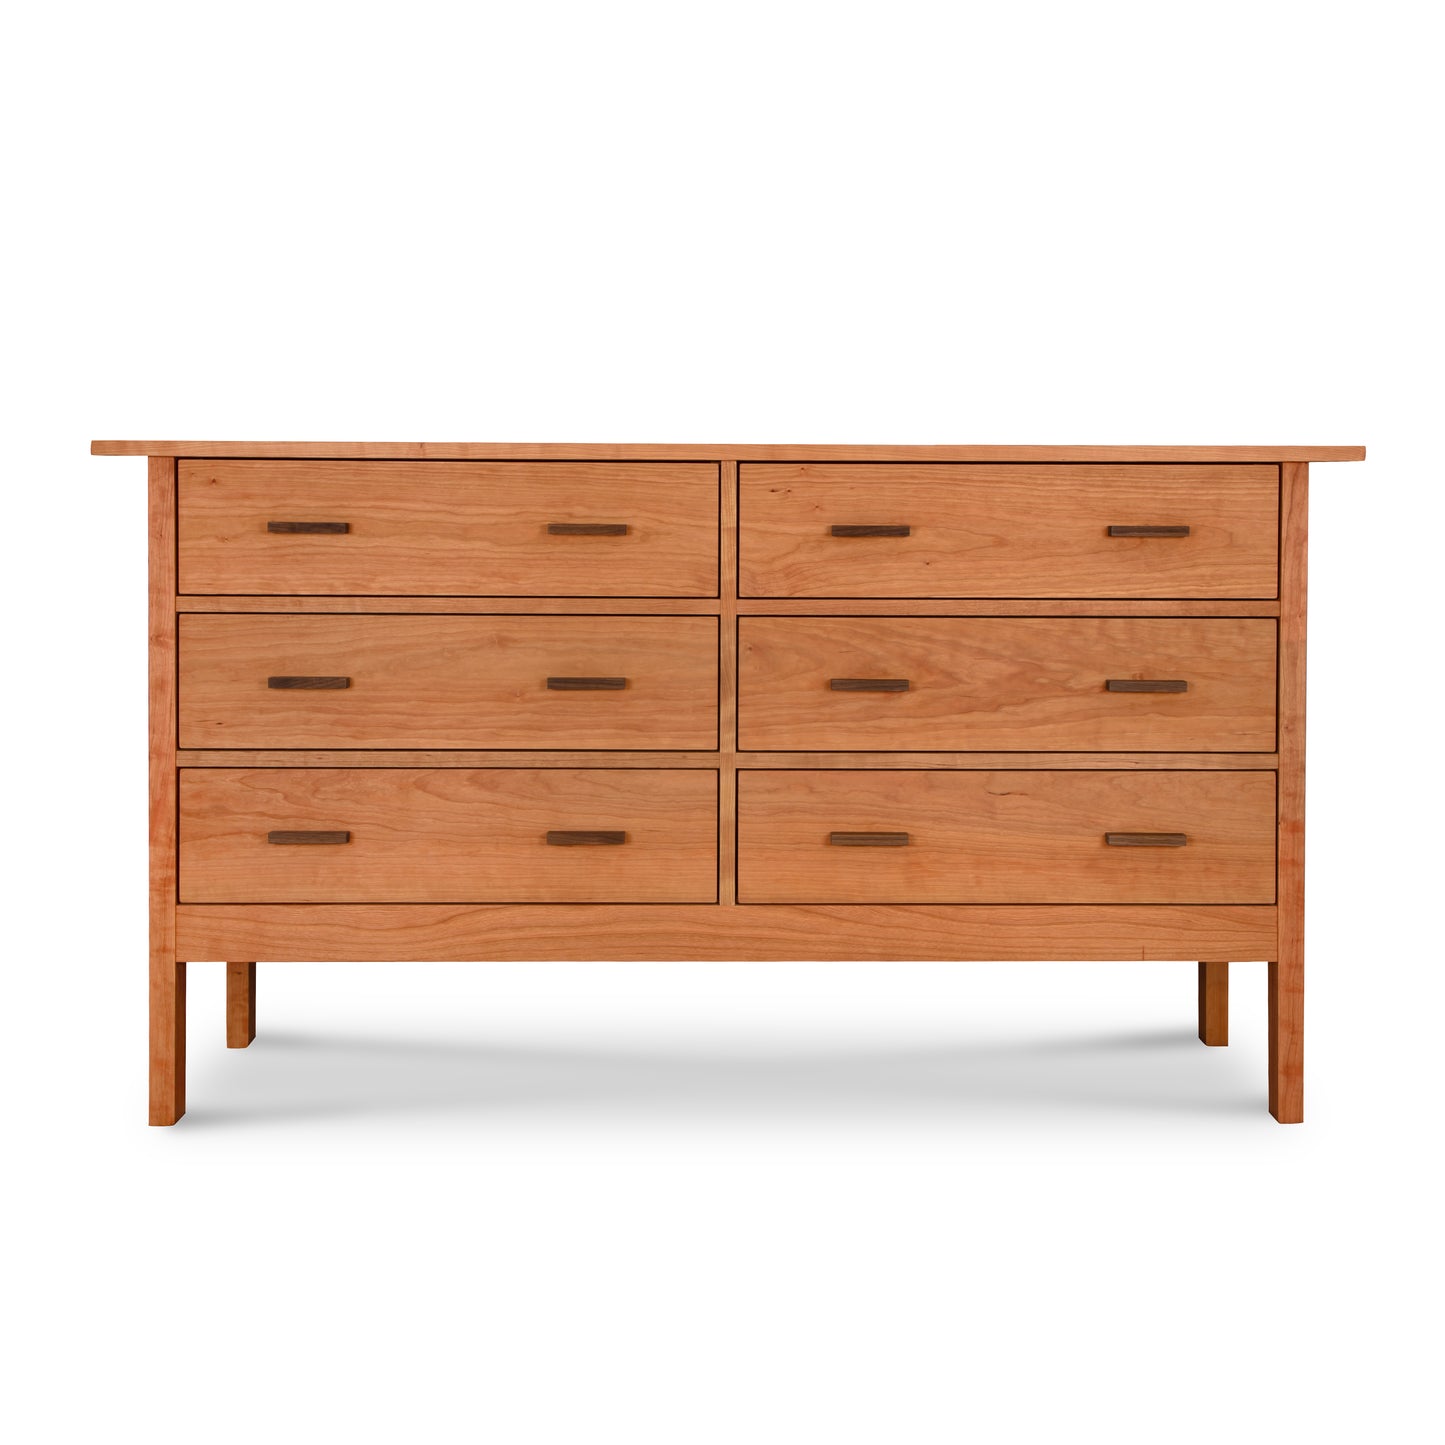 A Modern Craftsman 6-Drawer Dresser from Vermont Furniture Designs, isolated on a white background.